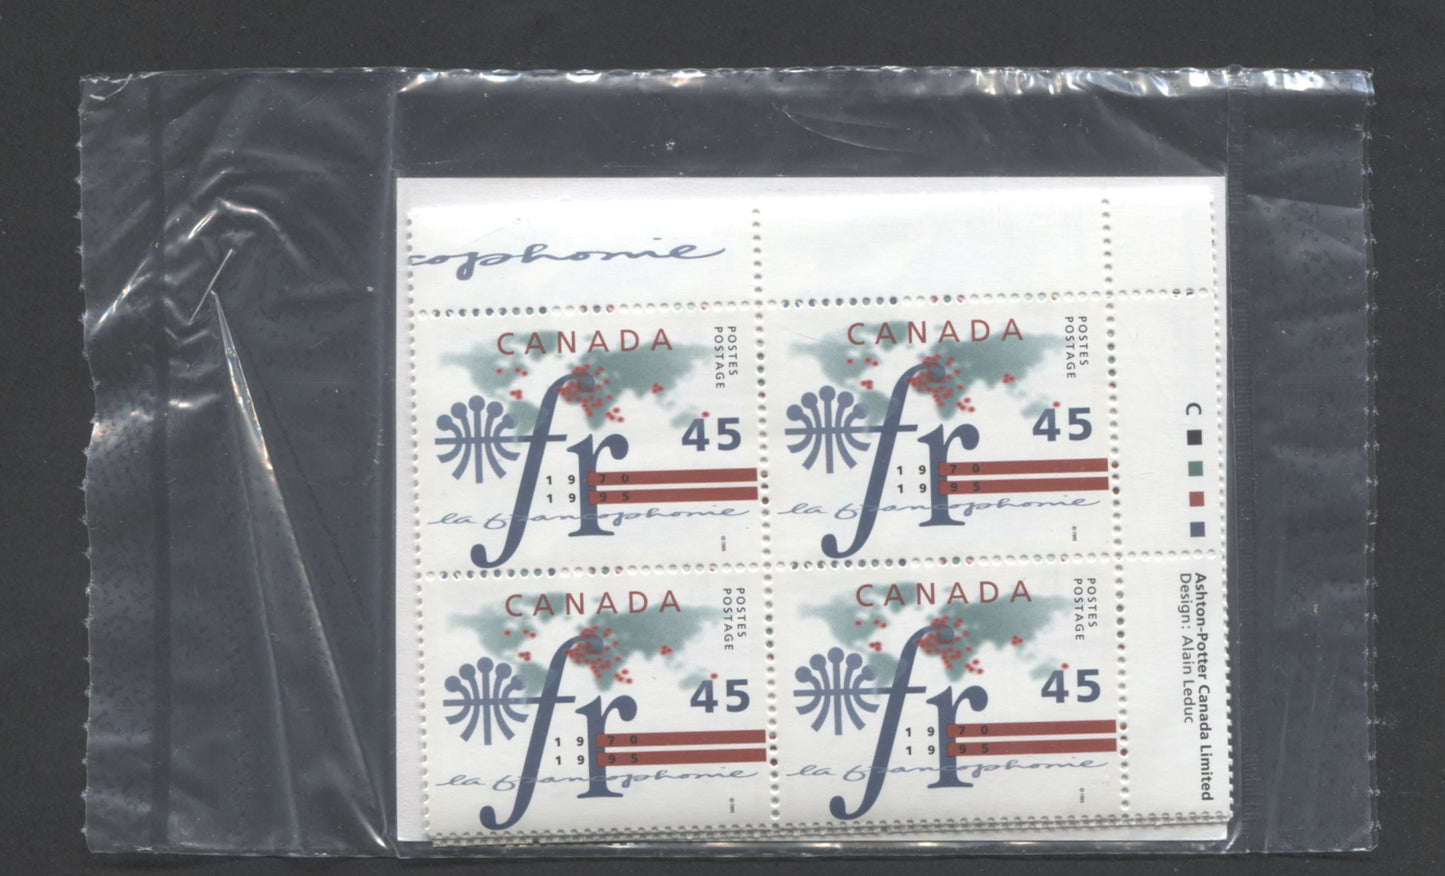 Lot 297 Canada #1589 45c Multicolored 1995 La Francophonie Issue, Canada Post Sealed Pack of Inscription Blocks on GT4 Coated Paper With HB Type 6A Insert Card, VFNH, Unitrade Cat. $18